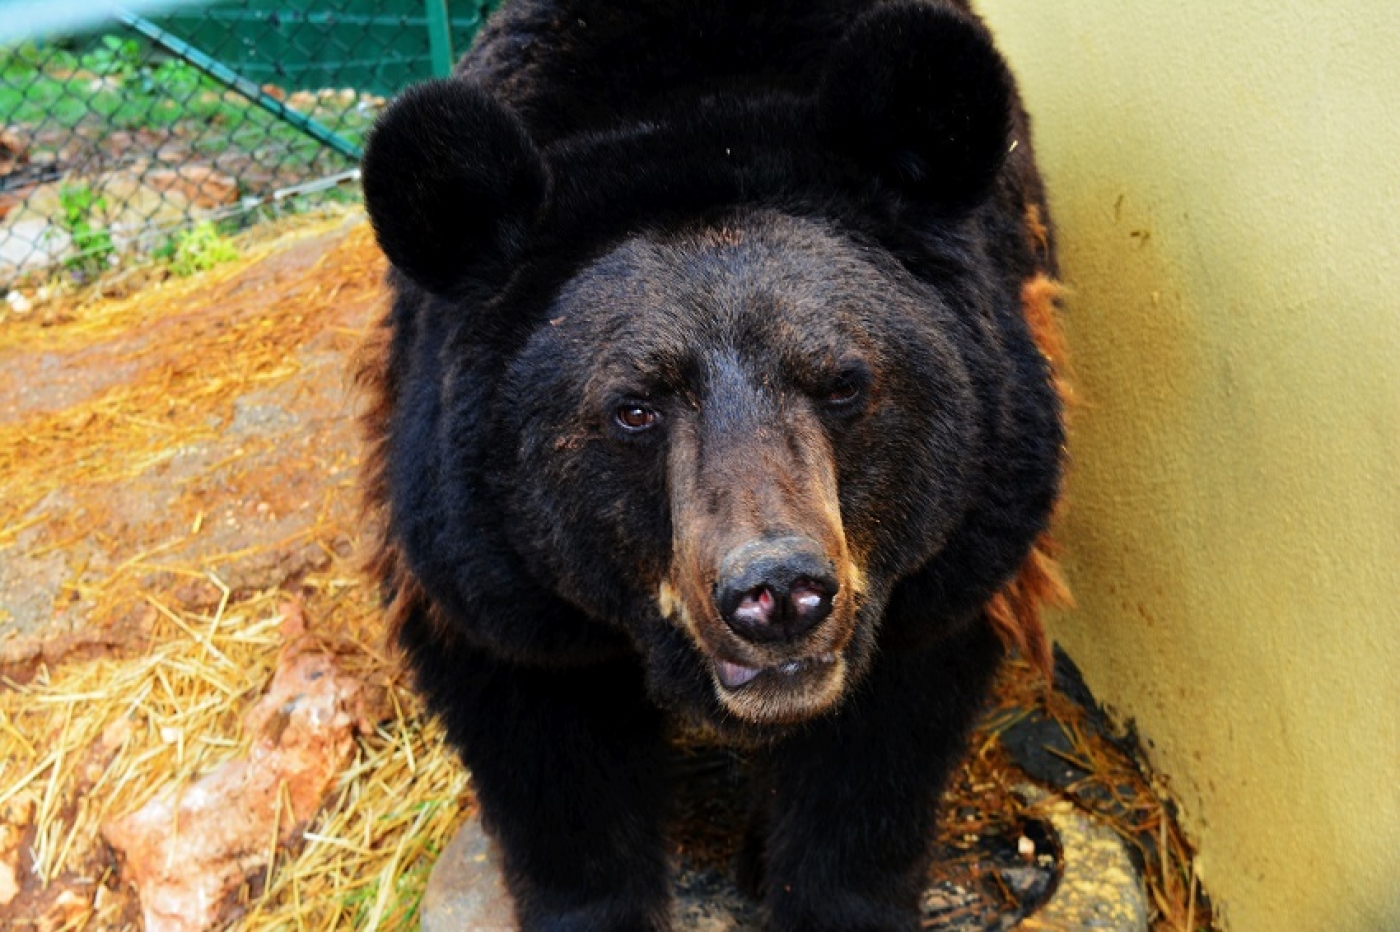 War is hell for animals too: In Jordan, these bears have found a sanctuary  | Middle East Eye